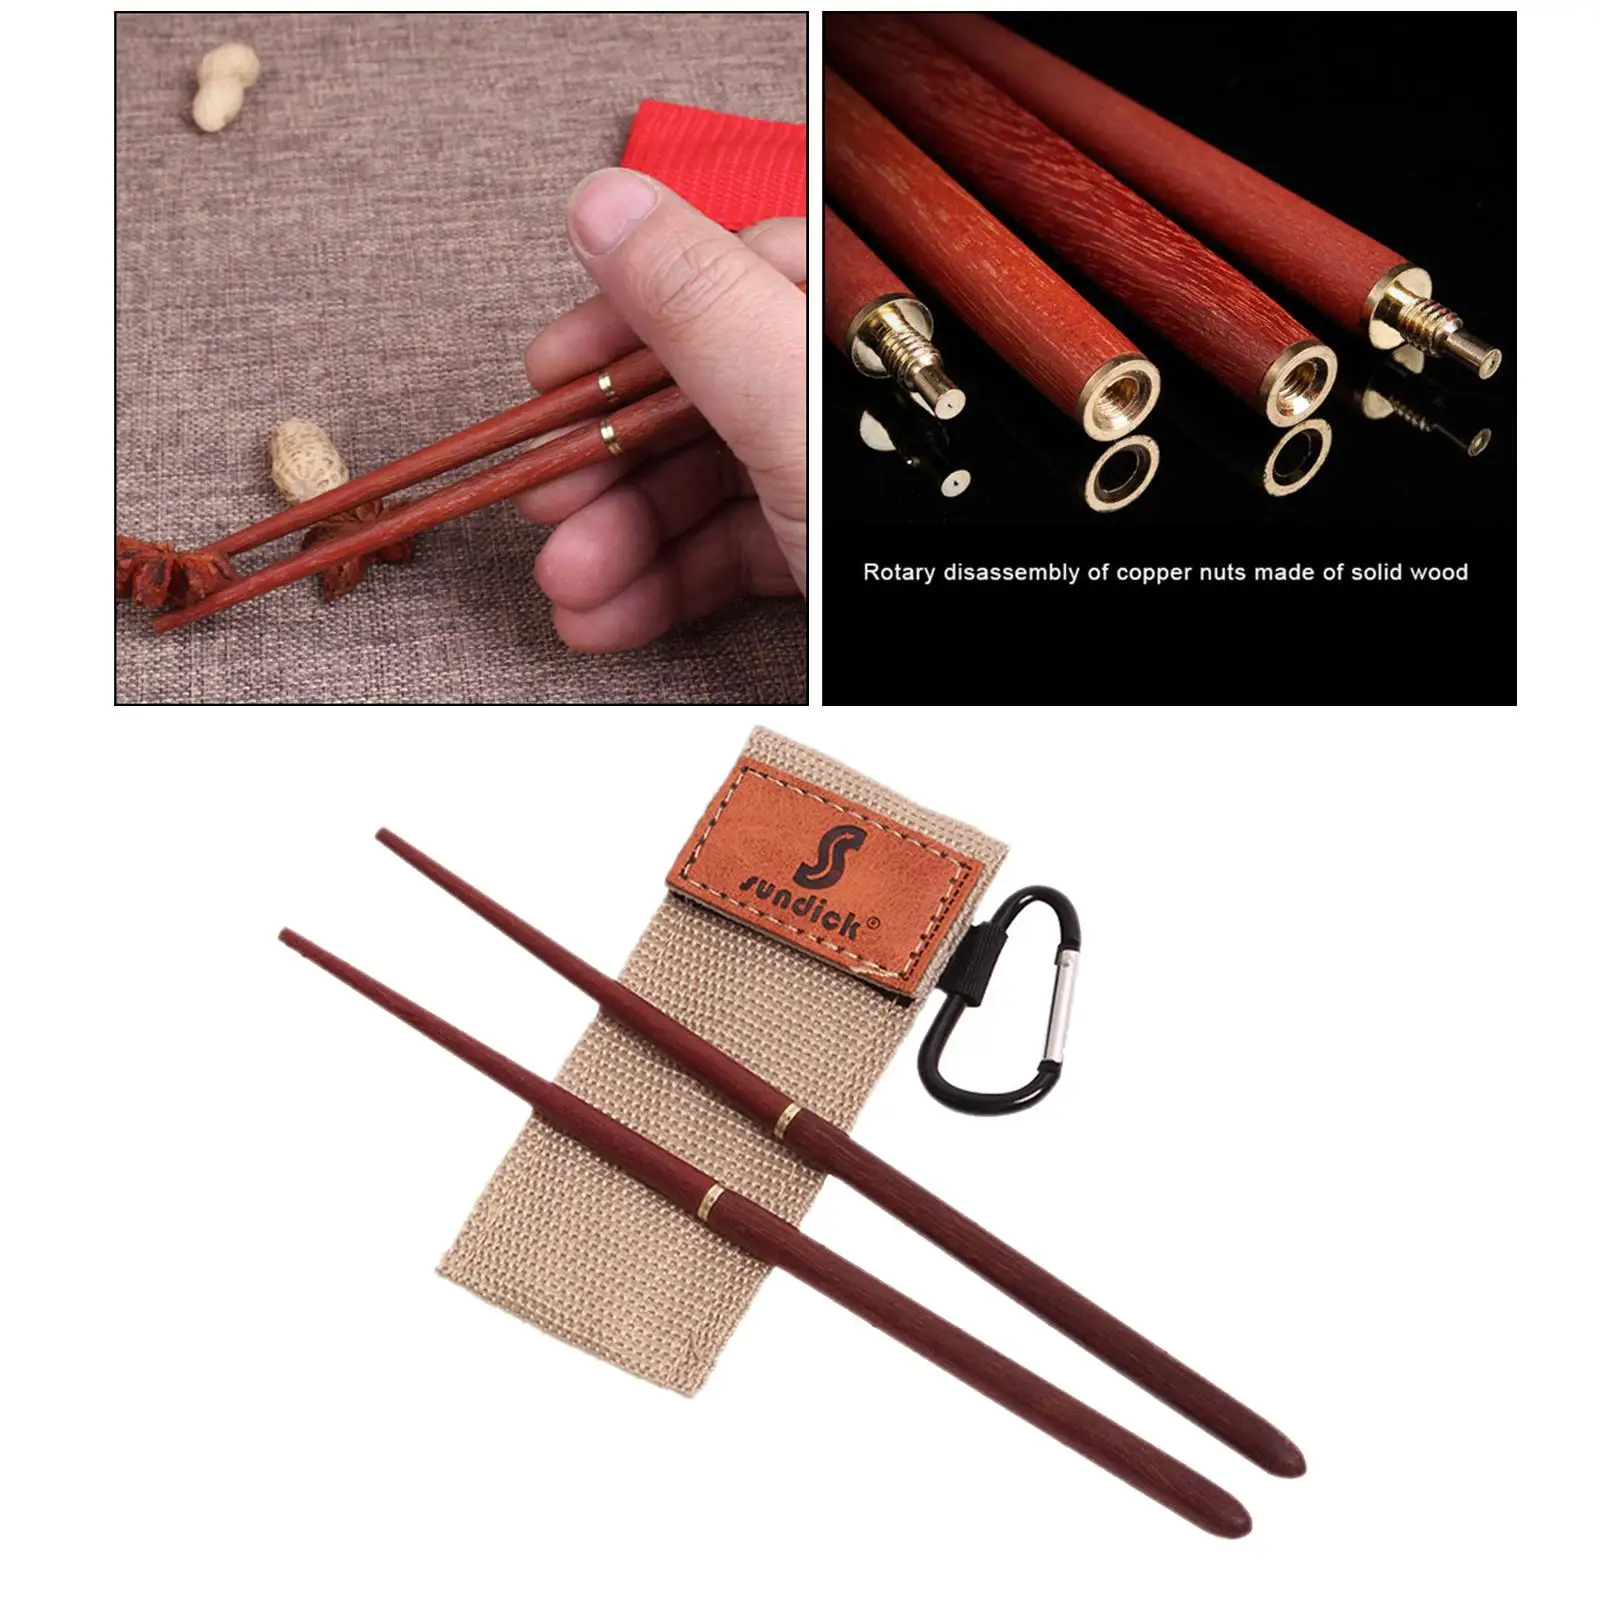  Collapsible Wooden Chopsticks Tableware Practical Camping School BBQ